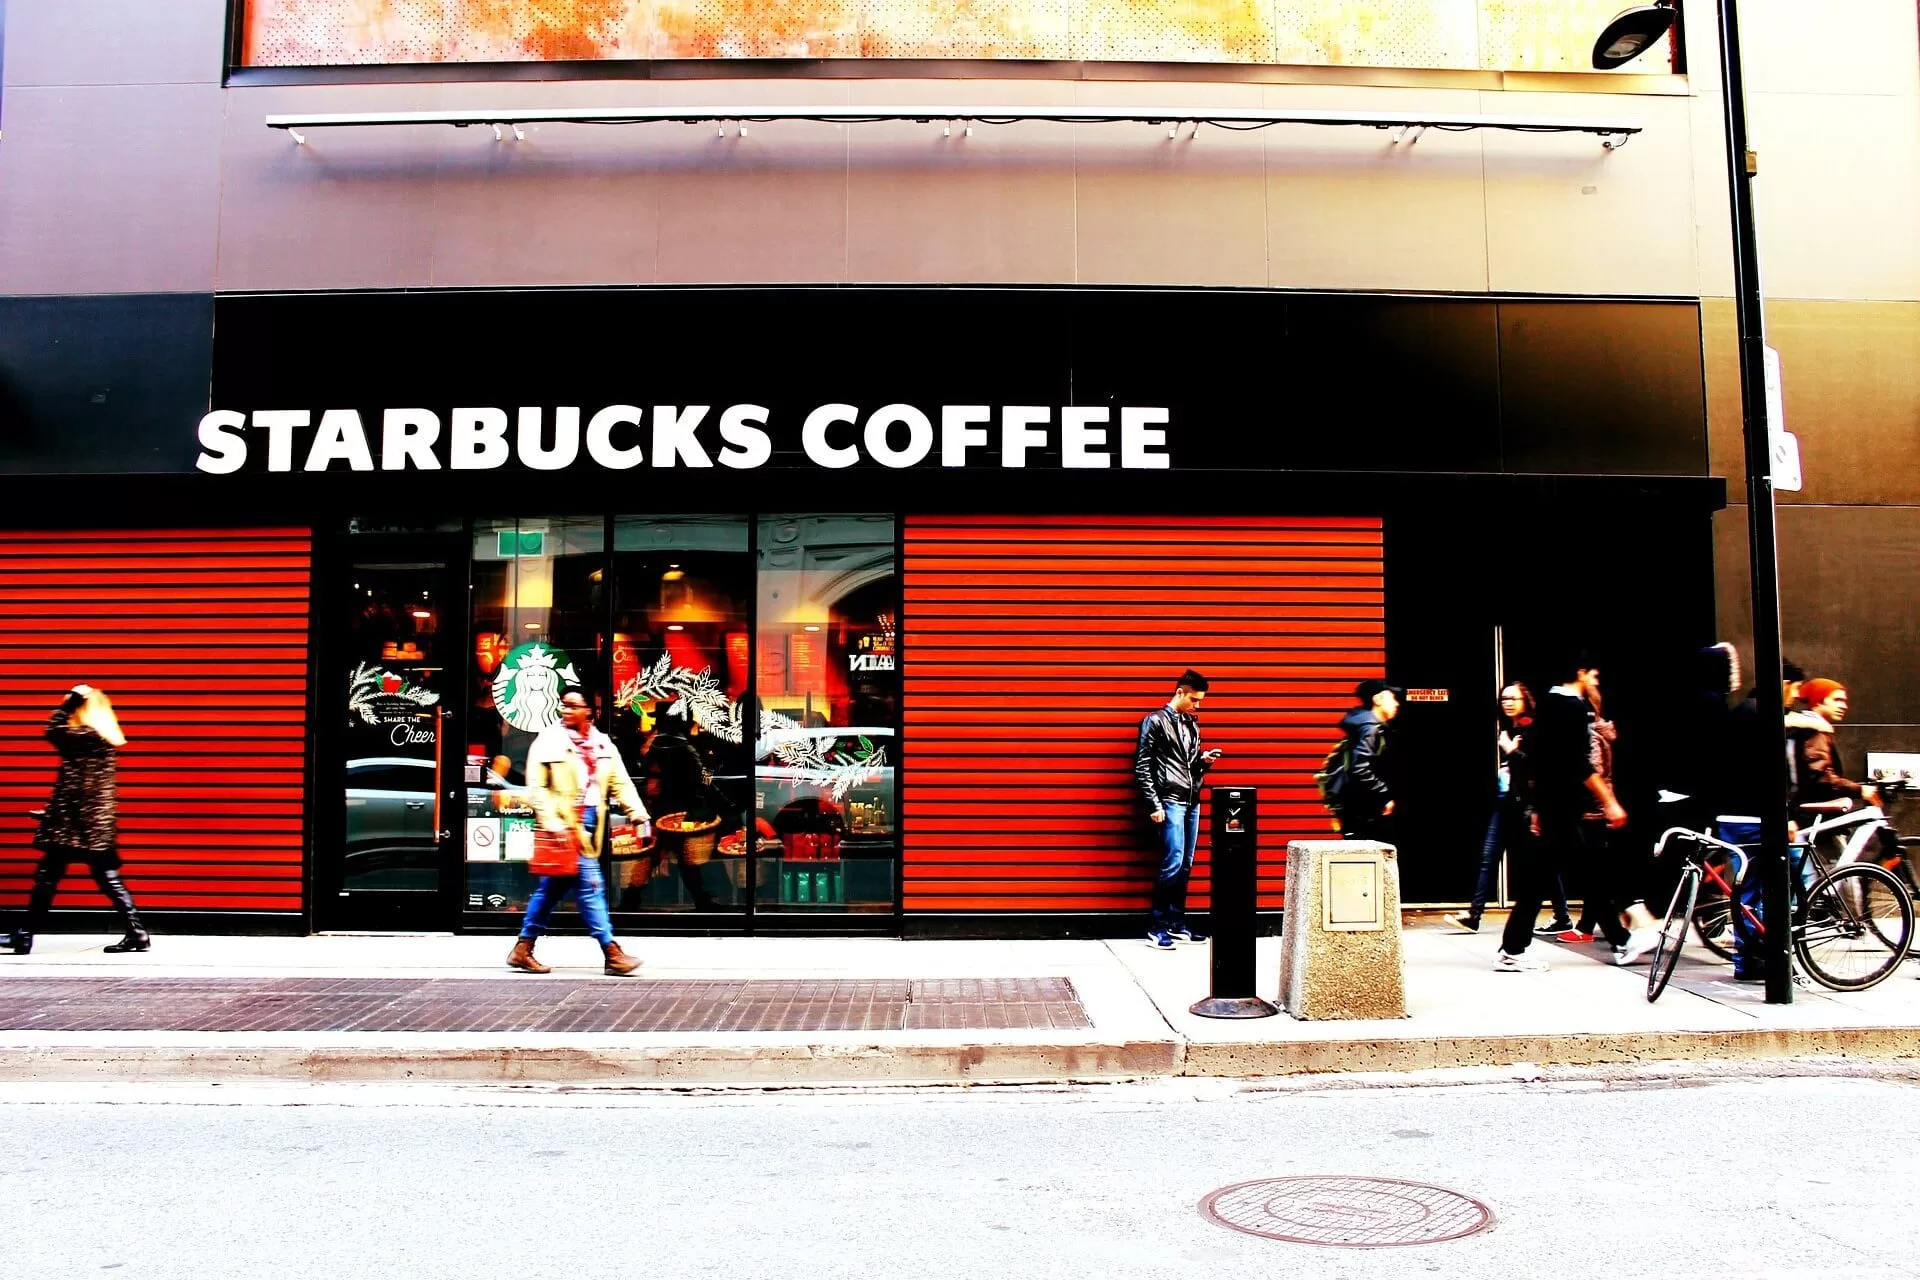 Starbucks coffee secrets that can help you earn money with them